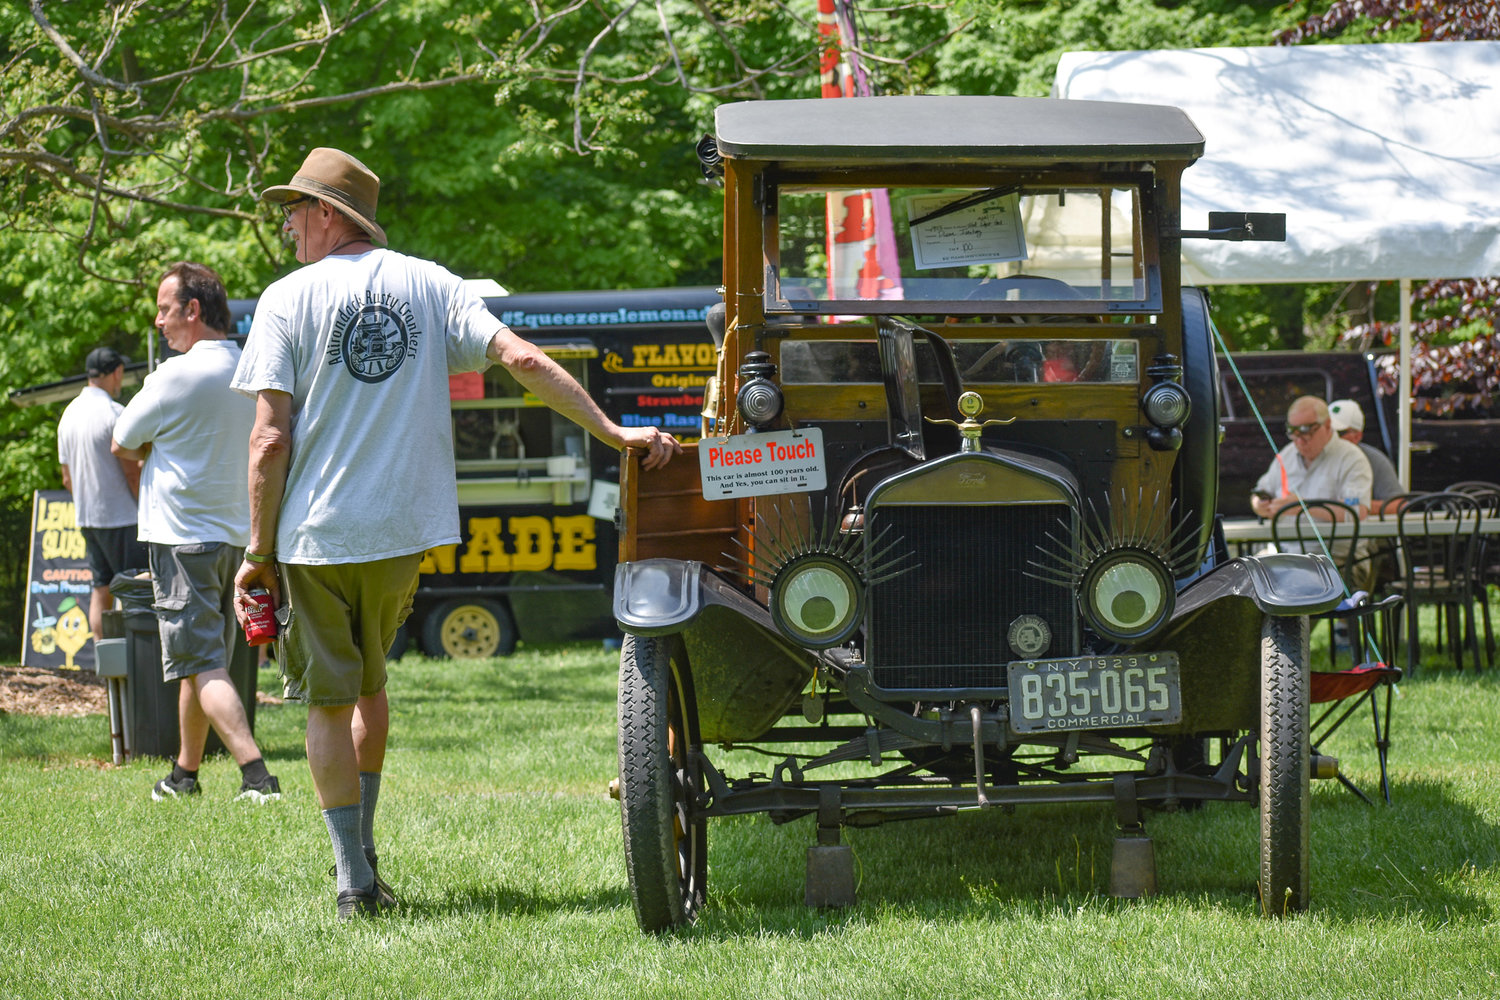 Visitors and participants at a classic car show at the Oneida Community Mansion House check out some of the vehicles on display.